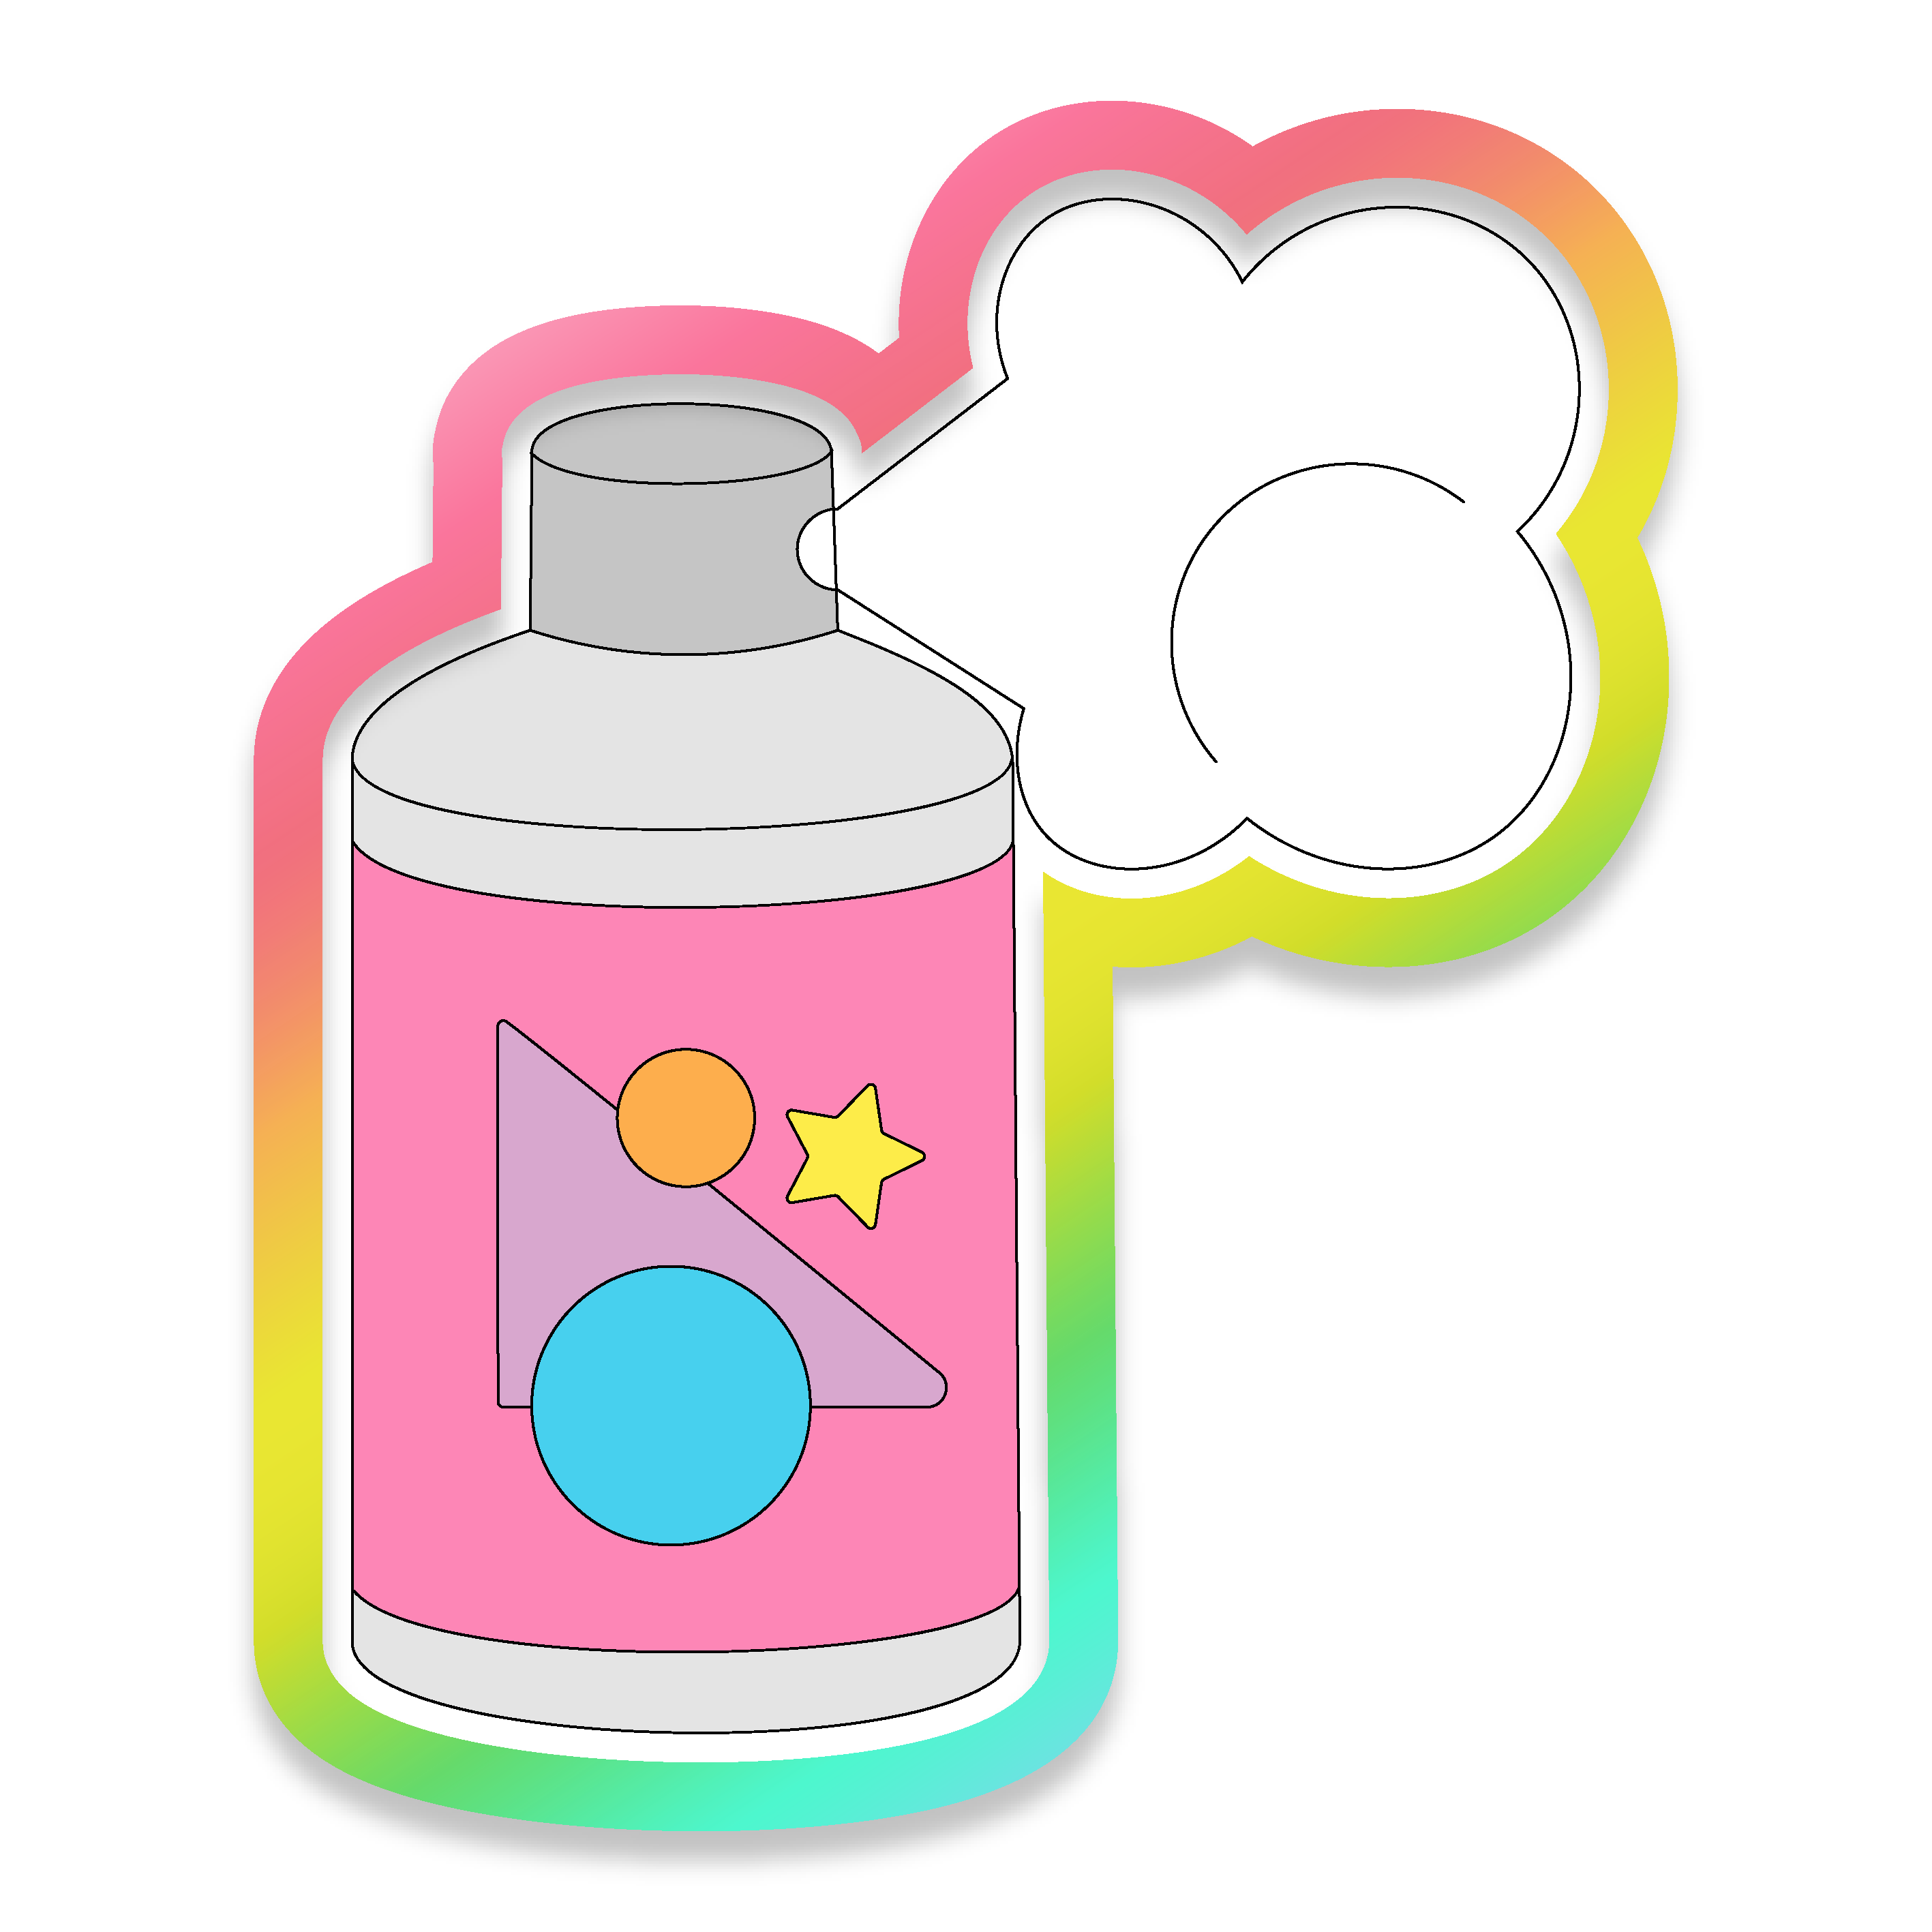 Clipart image of a can of hairspray.